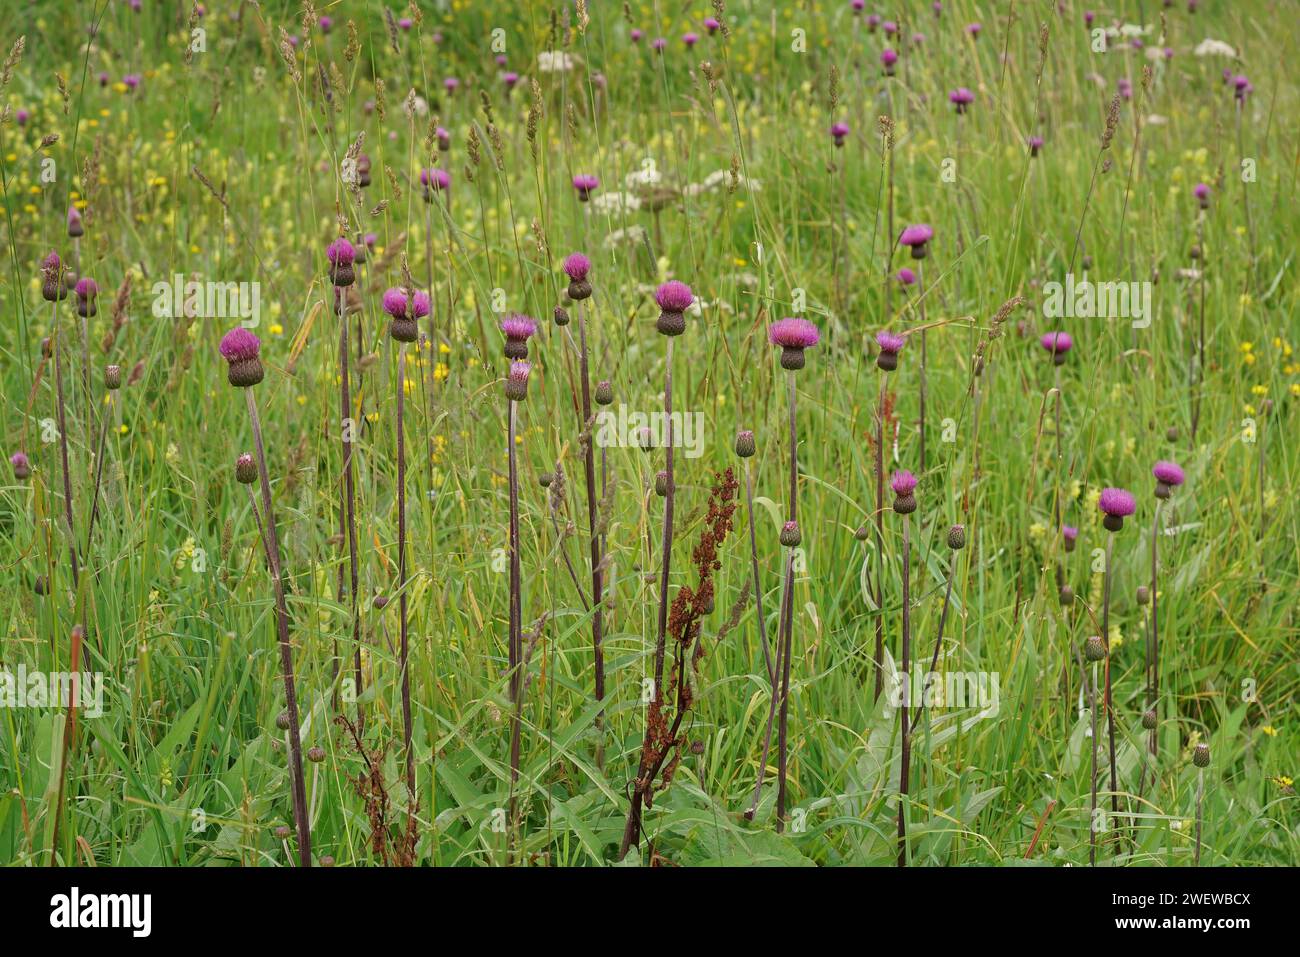 Natural closeup on an aggregation of colorful purple flowering melancholy thistle flowers, Cirsium heterophyllum Stock Photo